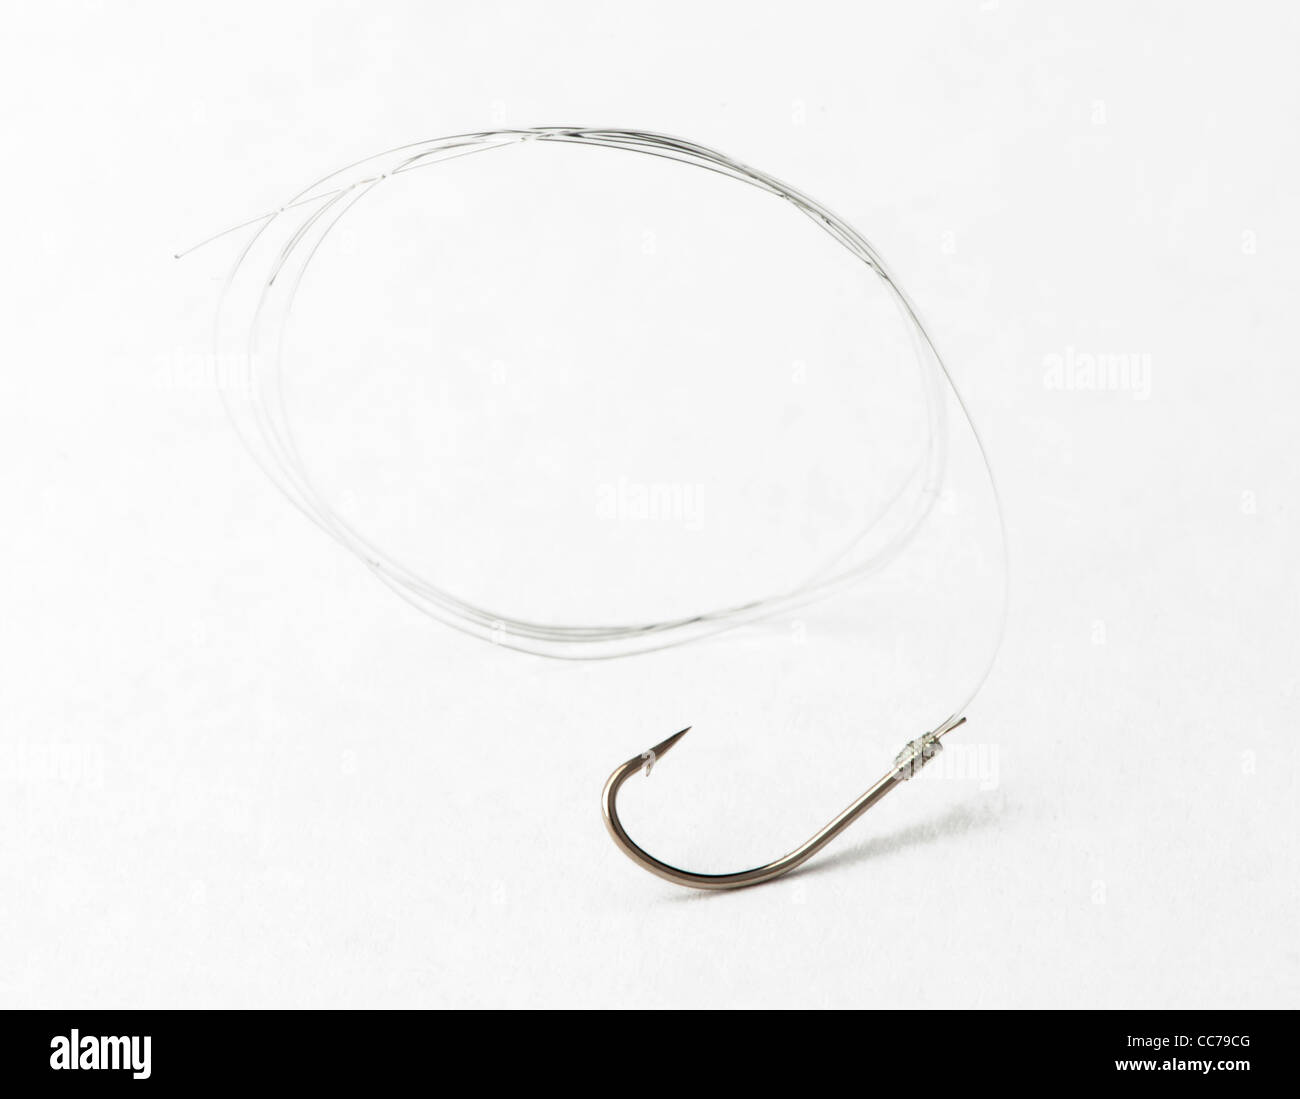 White fish hanging on a fishing line with a hook. Stock Photo by  ©George7423 313360554, Fish Line For Hanging 